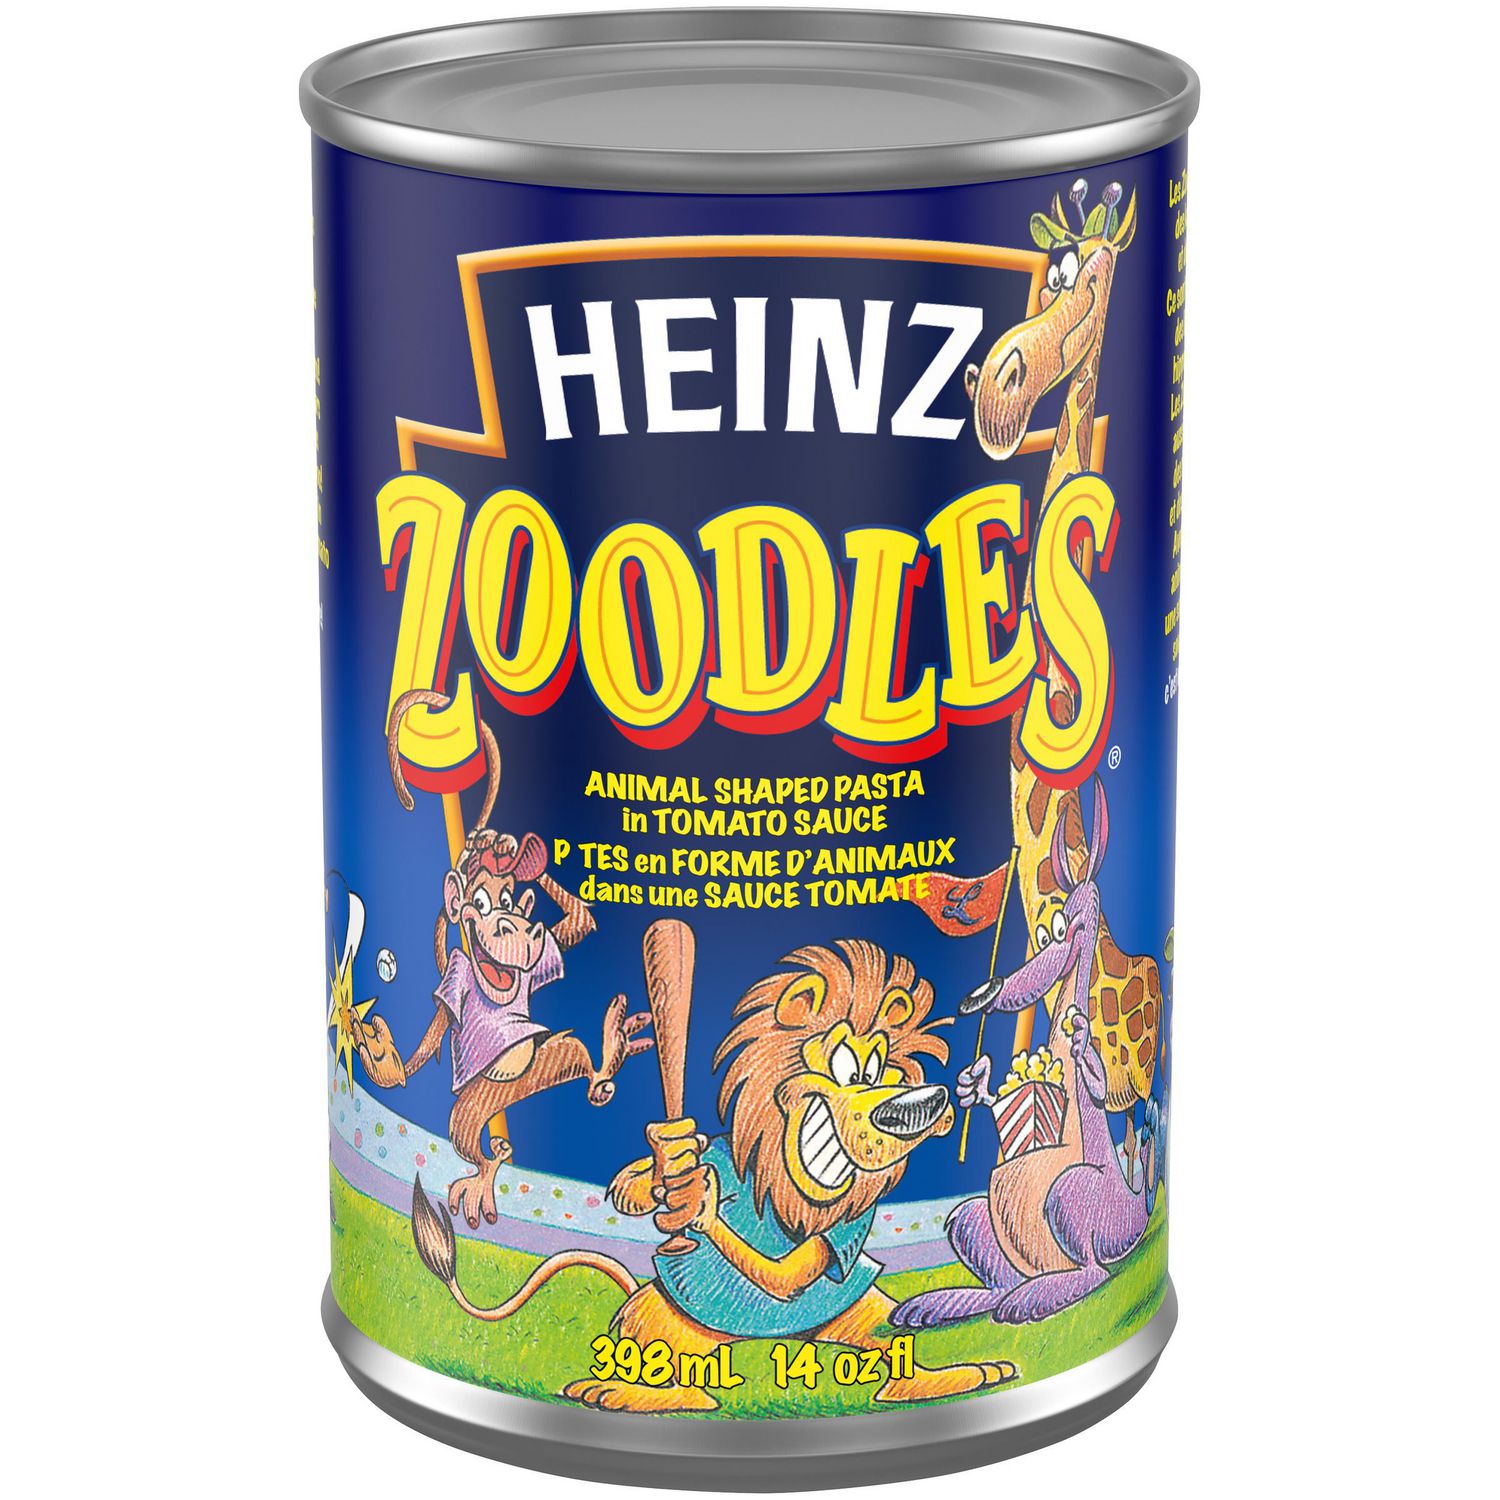 Heinz Zoodles Animal Shaped Pasta With Tomato Sauce Walmart Canada